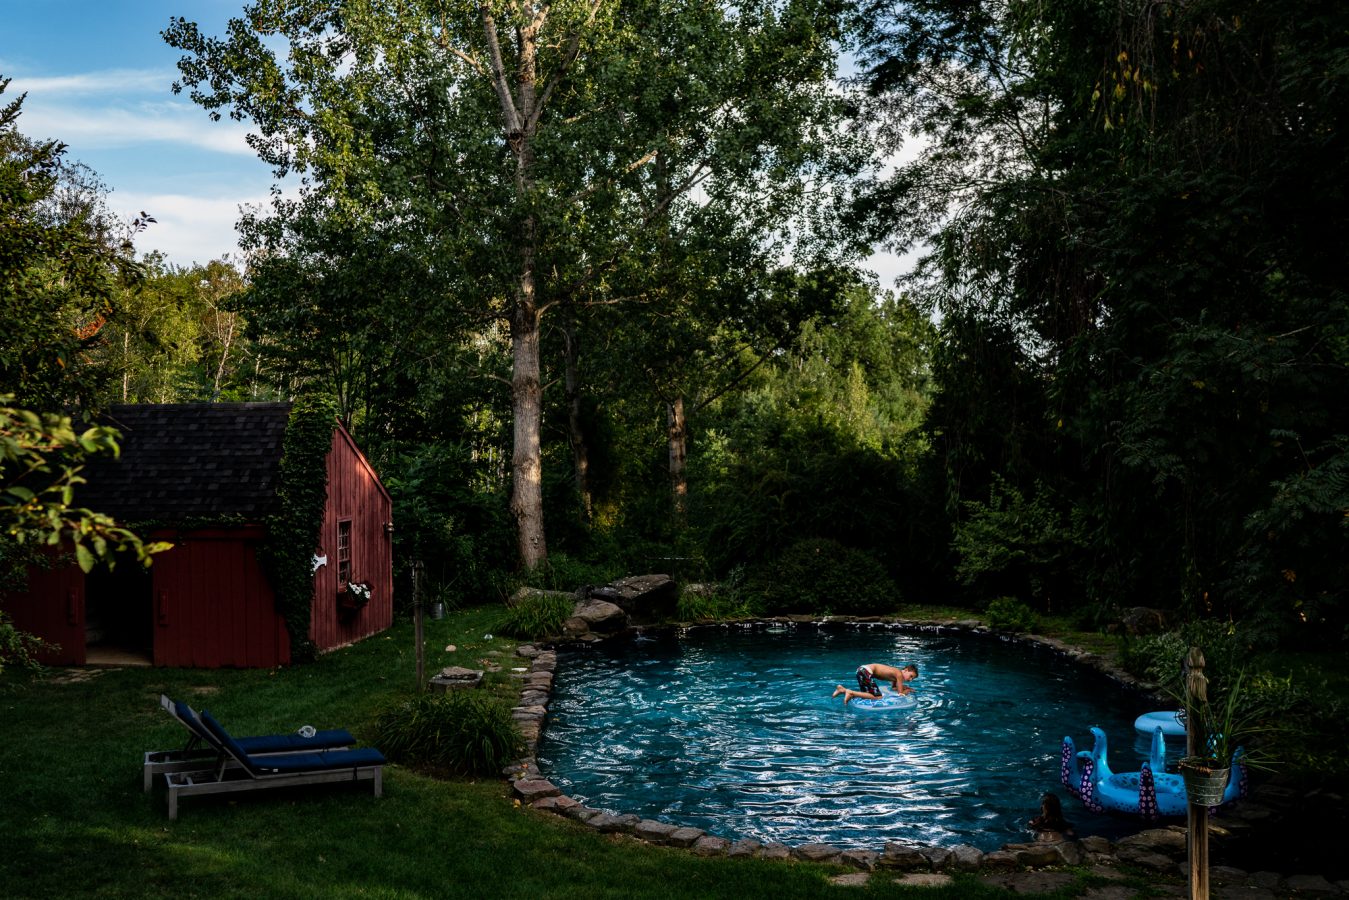 backyard view of pool with boy floating in it and red barn in background